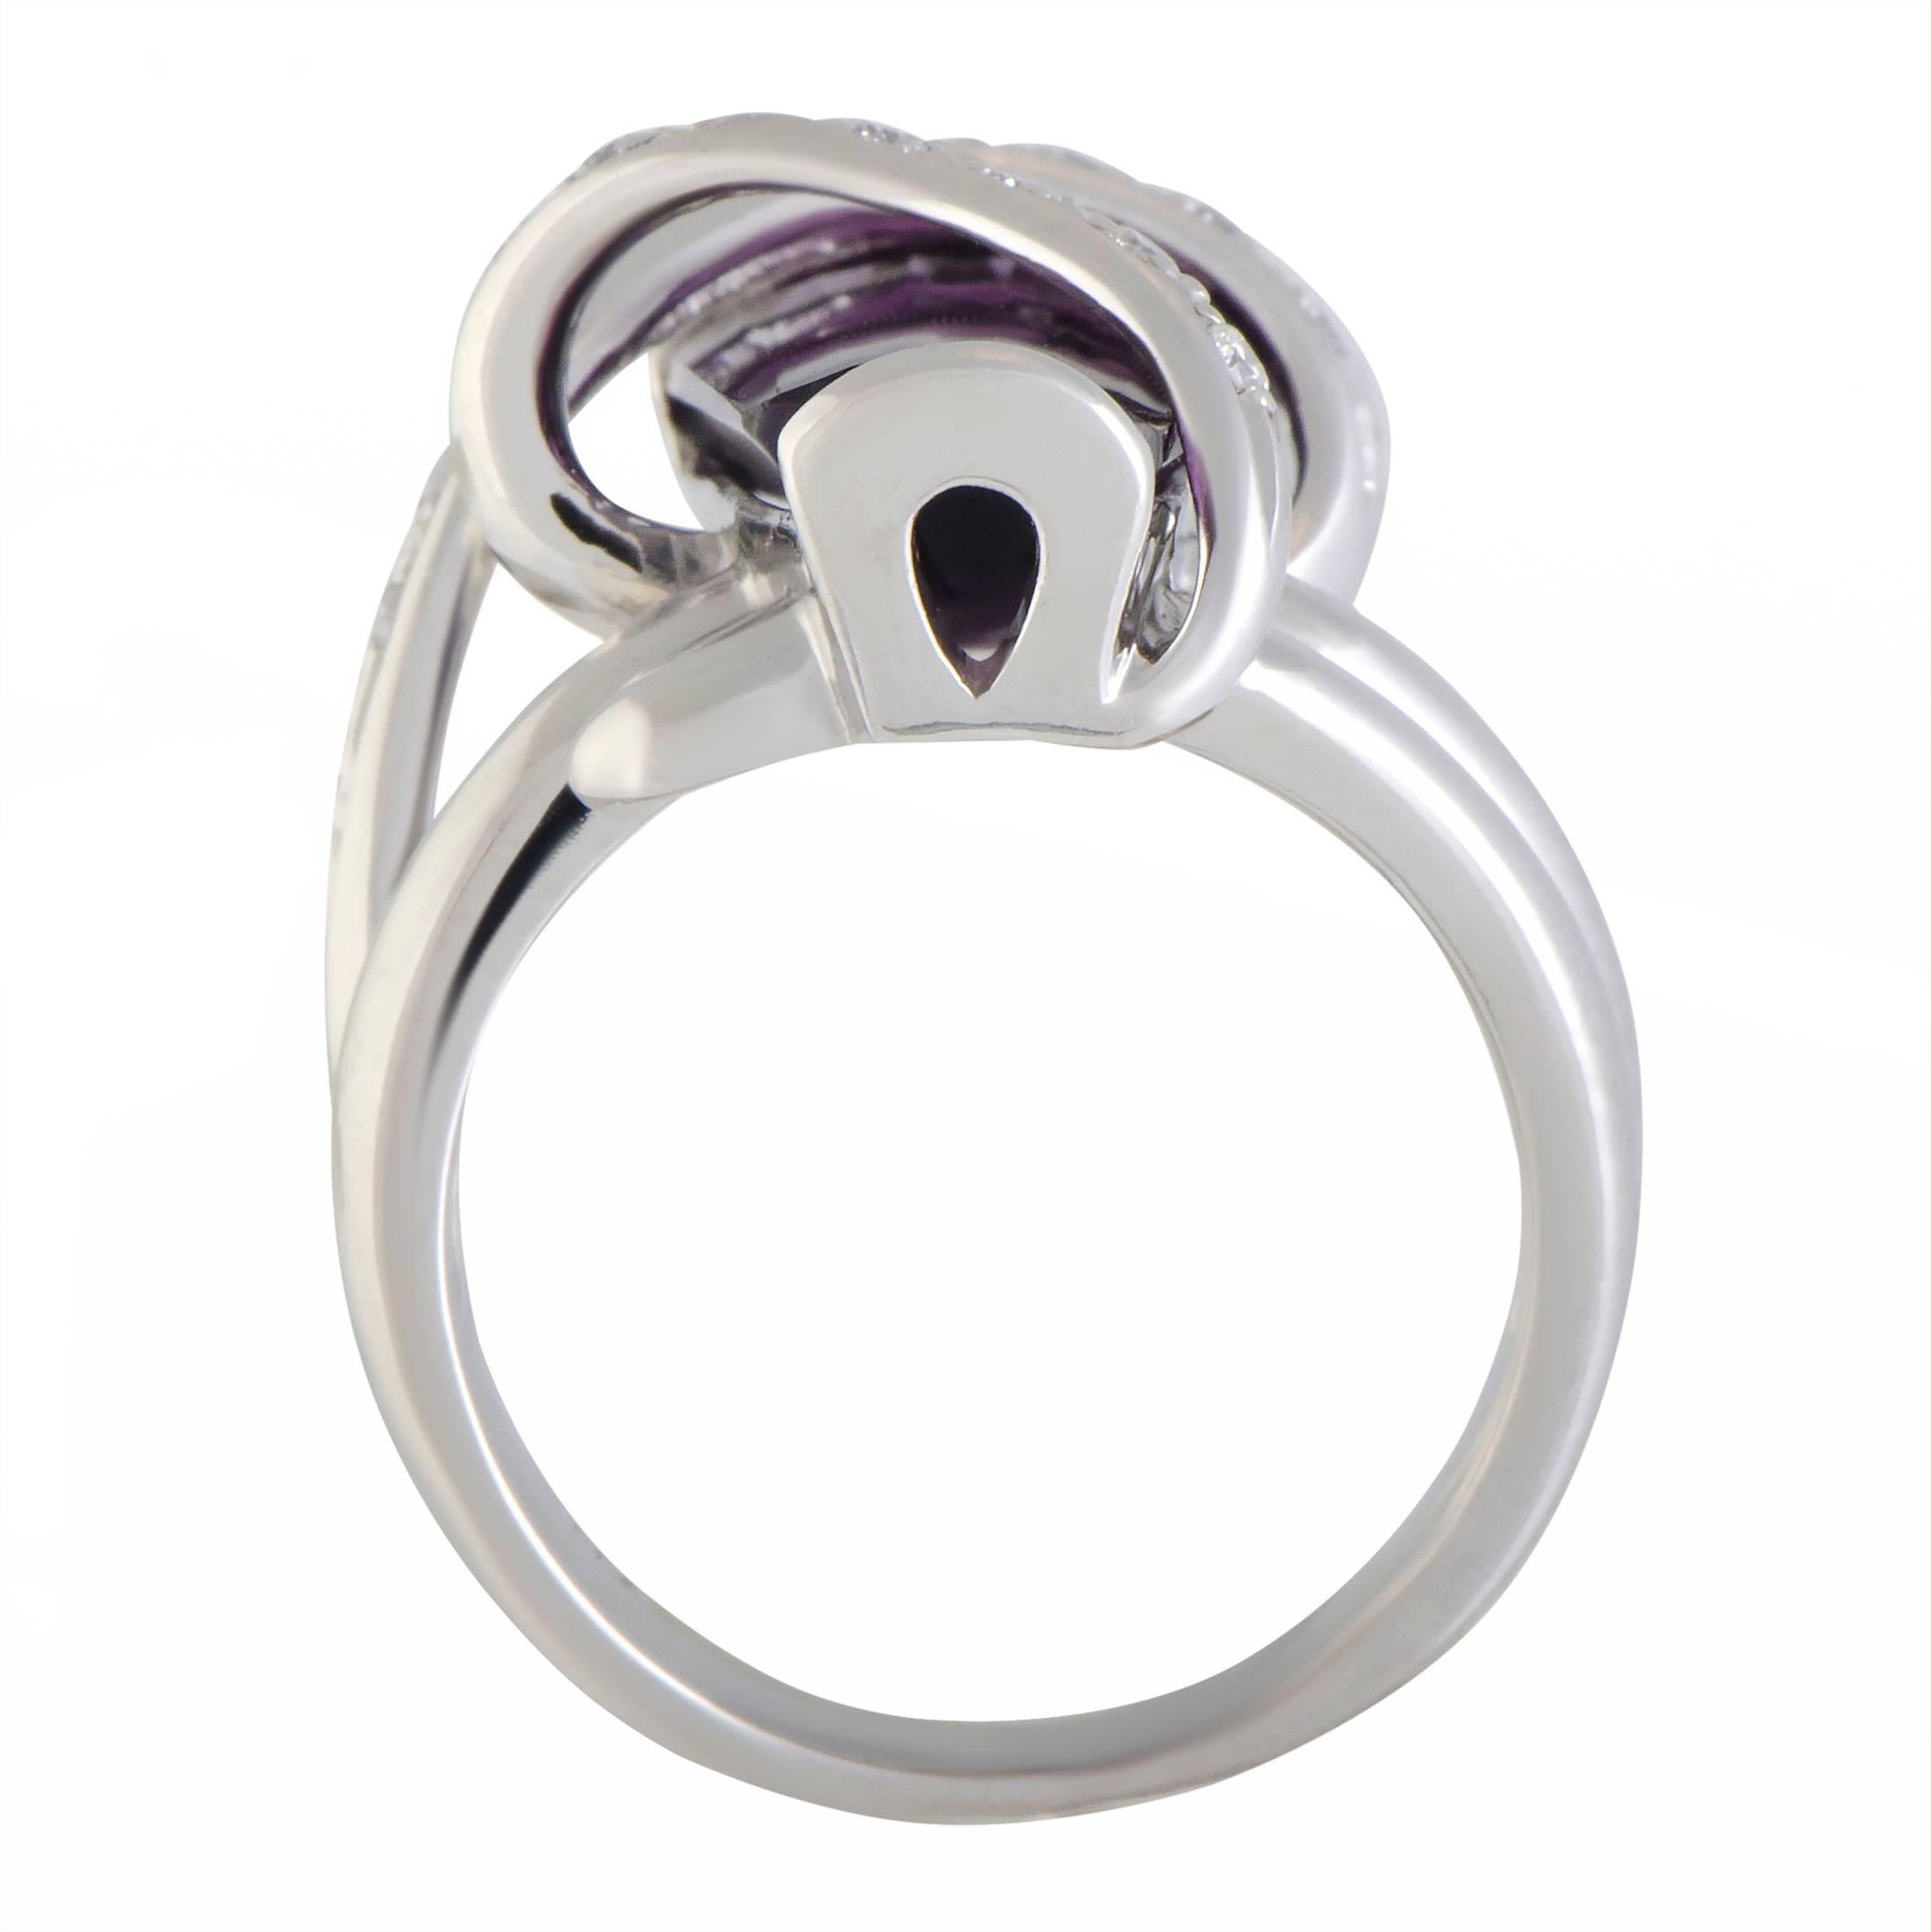 Presented in prestigious platinum and featuring a compellingly offbeat design, this ring offers an exceptionally eye-catching, fashionable appearance. The ring is set with 0.20 carats of diamonds and boasts a captivating amethyst that weighs